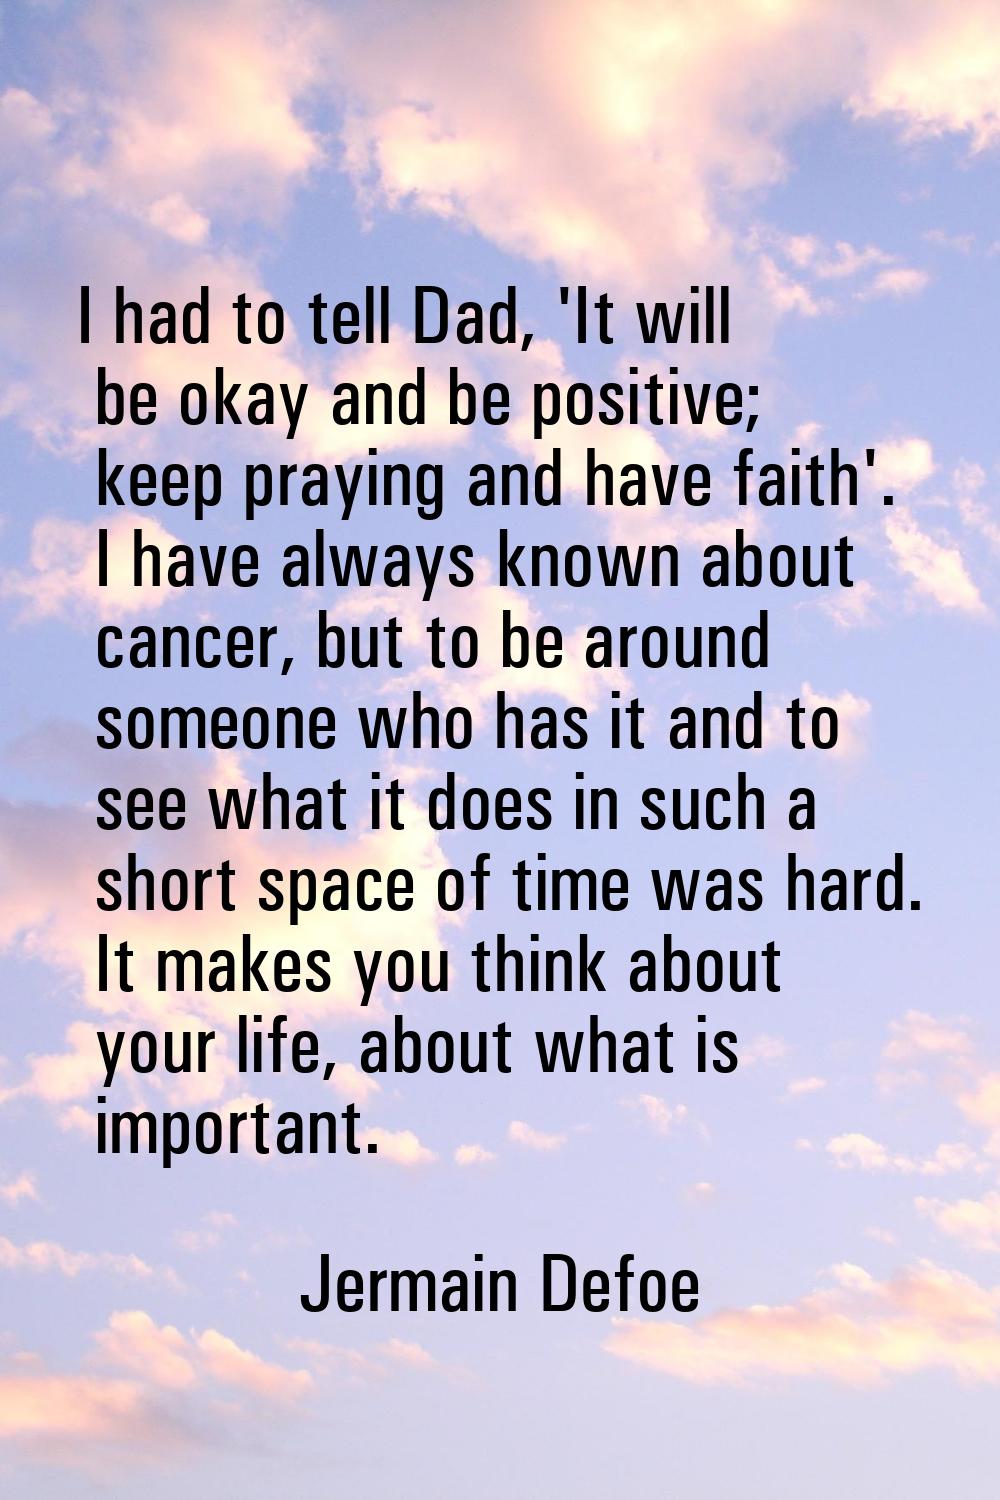 I had to tell Dad, 'It will be okay and be positive; keep praying and have faith'. I have always kn